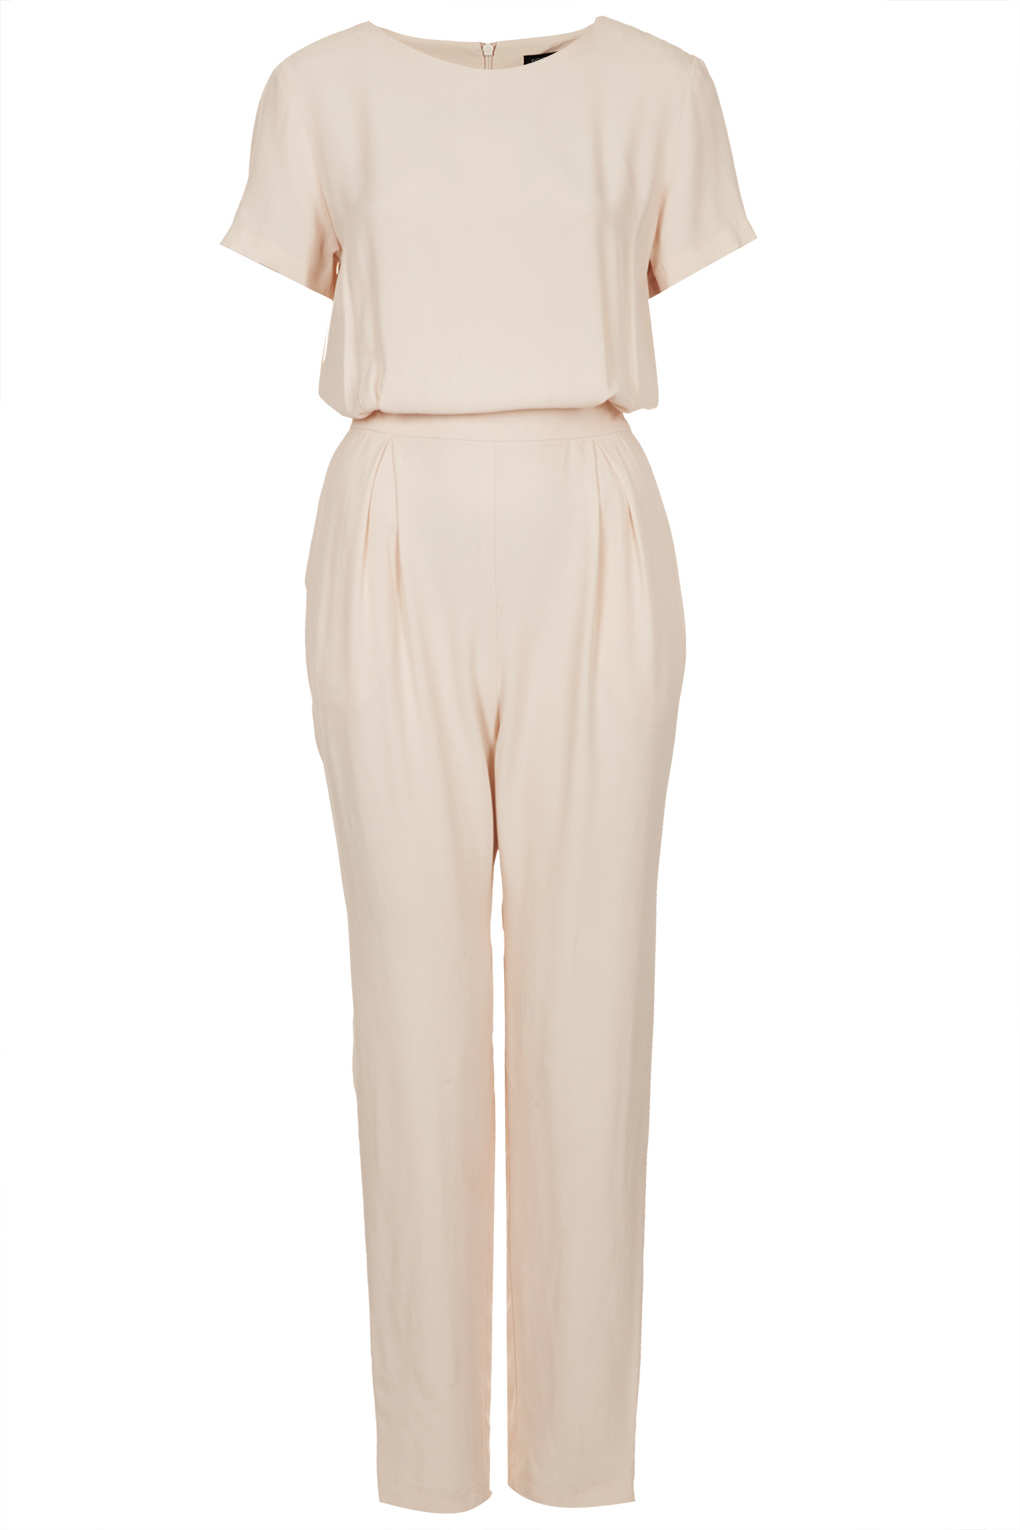 Lyst - Topshop Satin T-shirt Jumpsuit in White